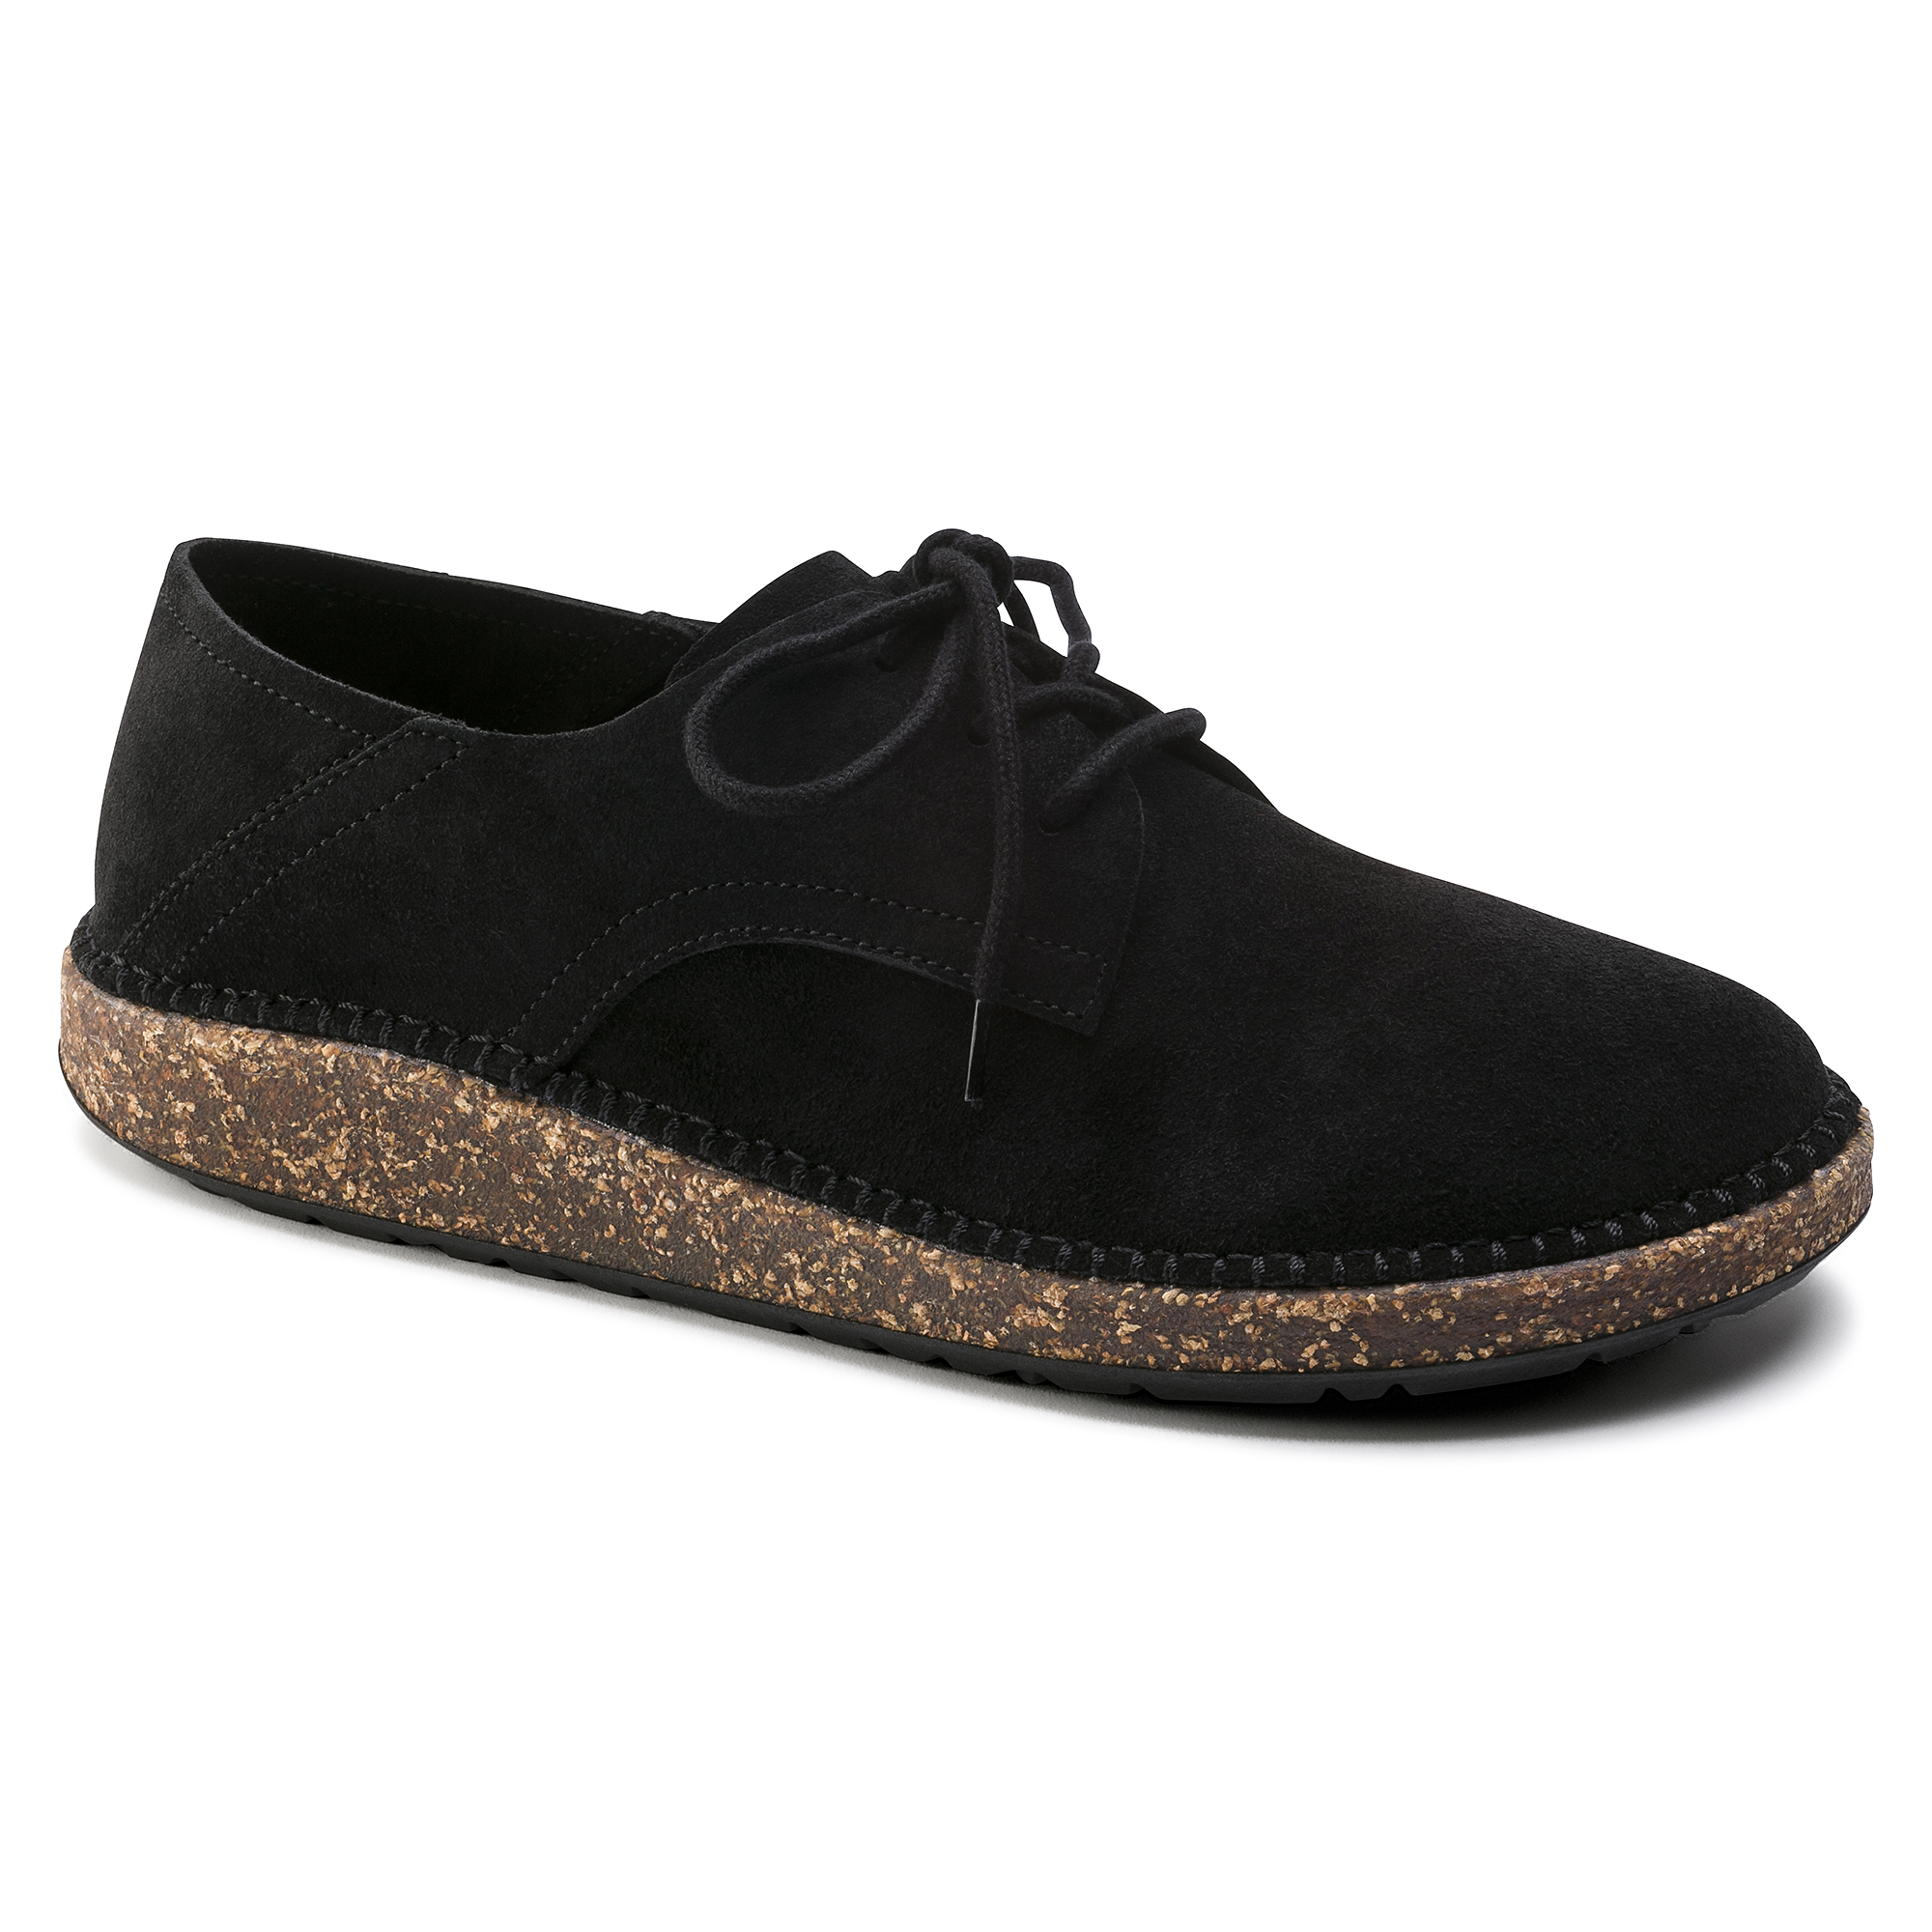 Gary Suede Leather | shop online at 